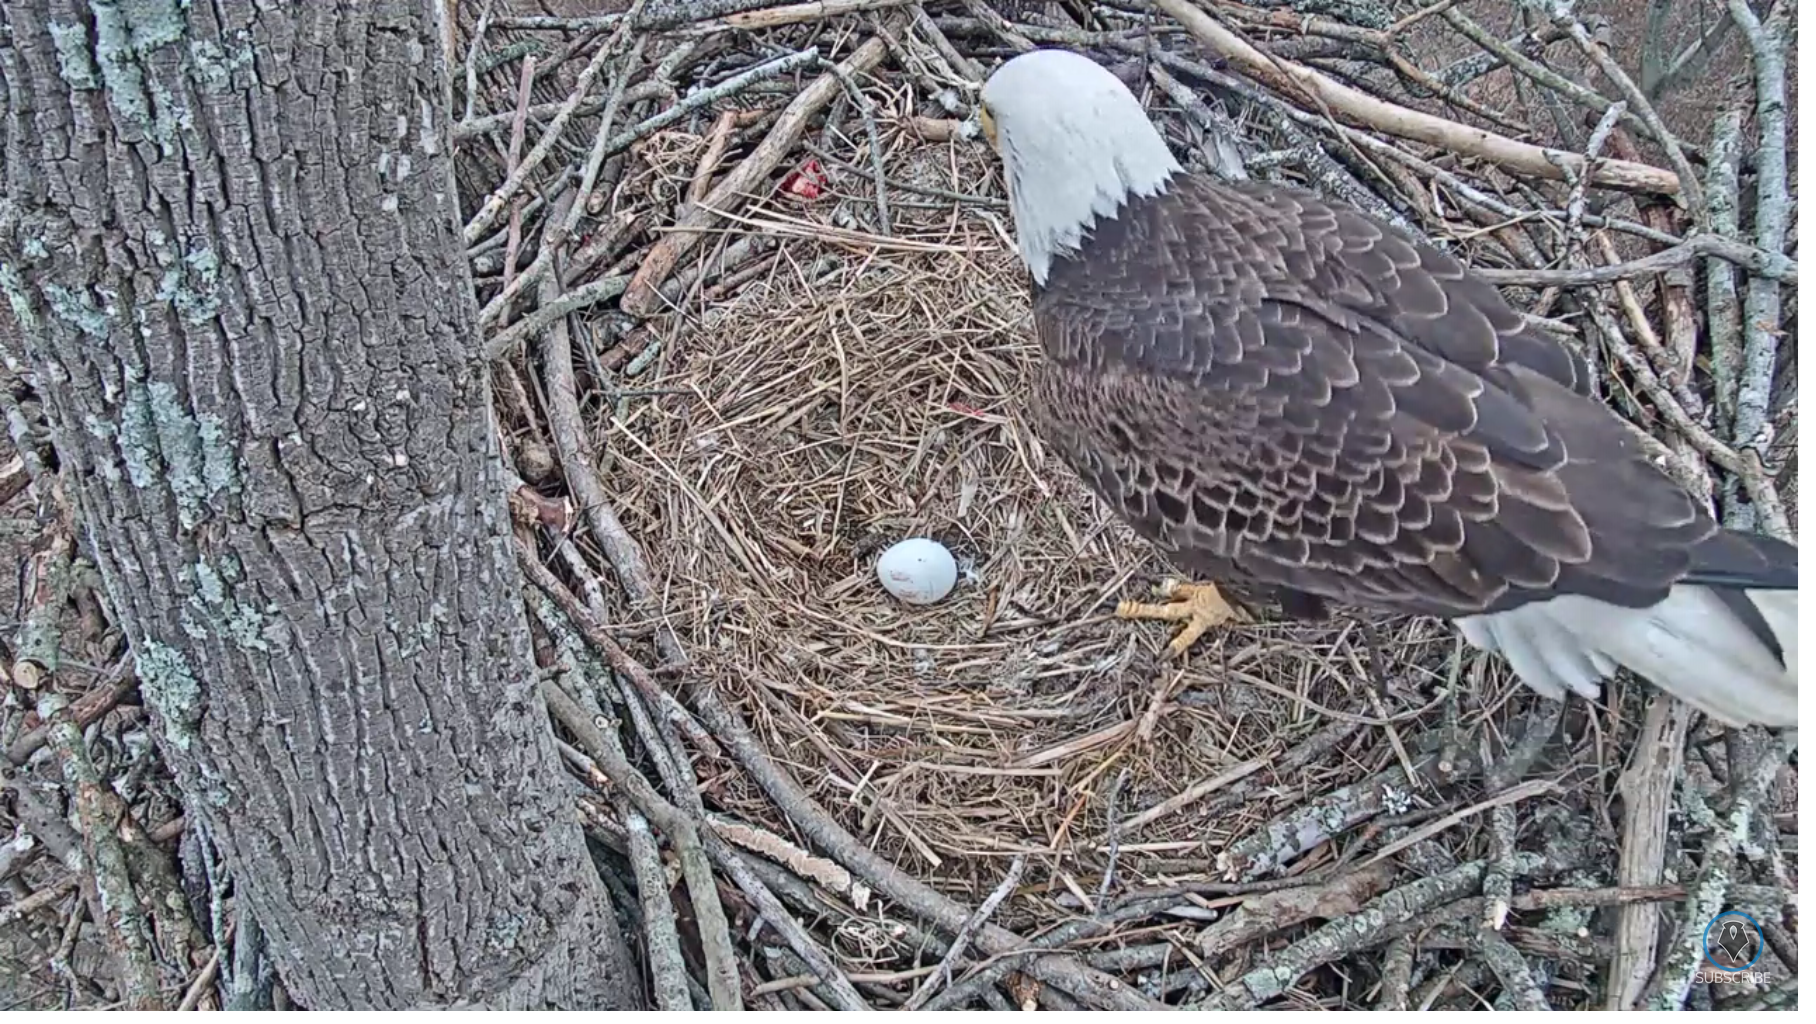 Eagle on nest with egg